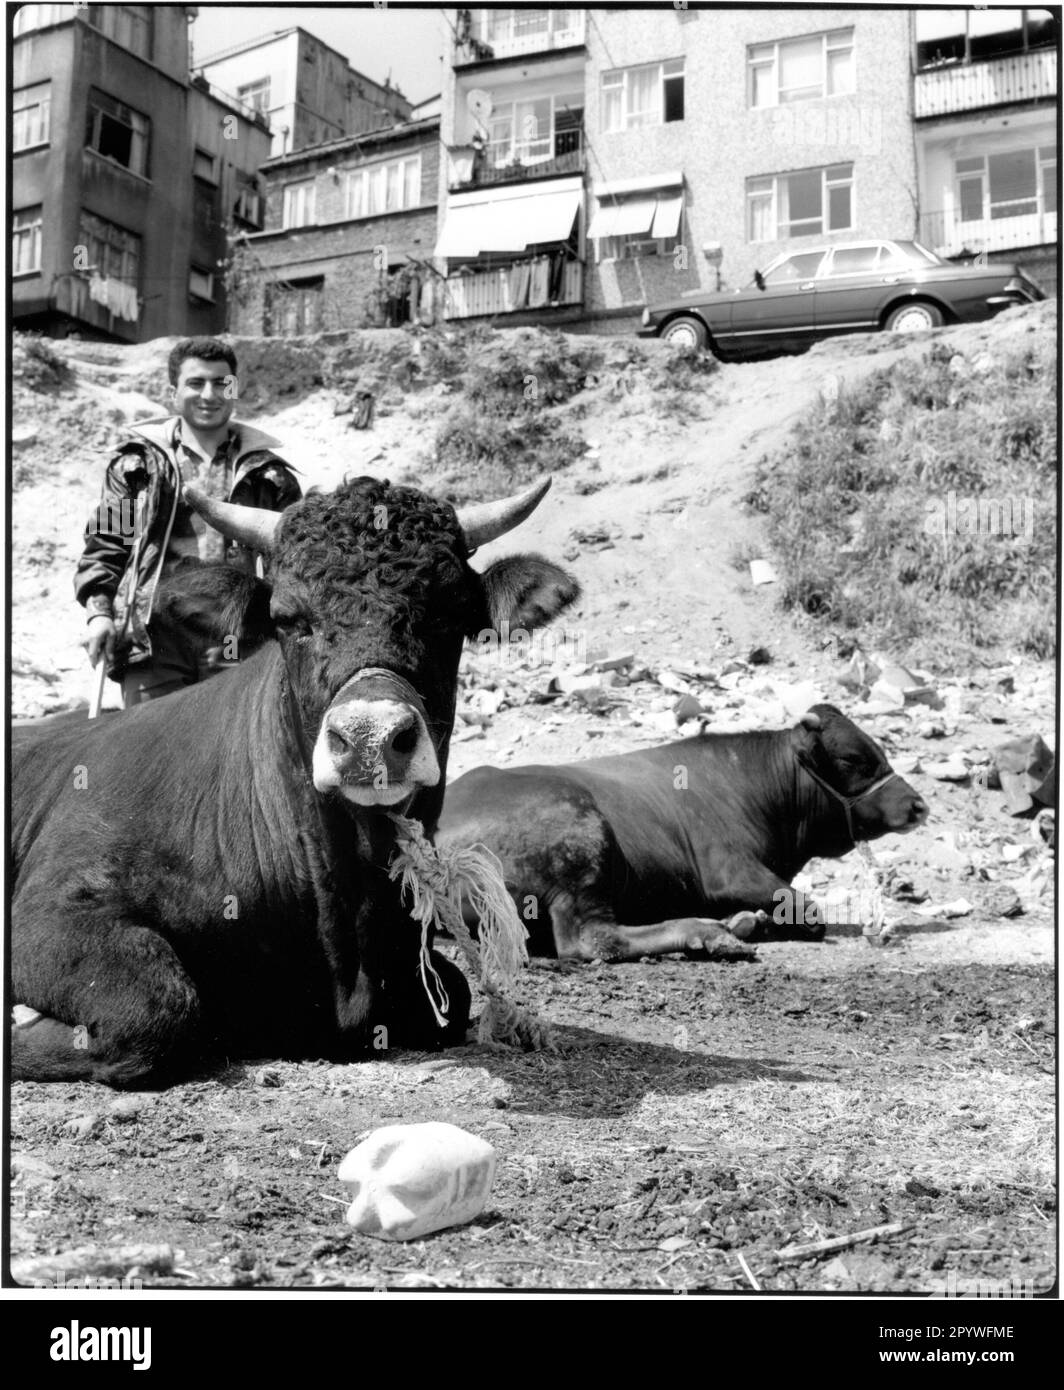 Ethnology: Turkey. Istanbul, Kamsimpasa District: Shepherd with cattle the day before the festival of sacrifice. Black-and-white. Photo, 1994. Stock Photo